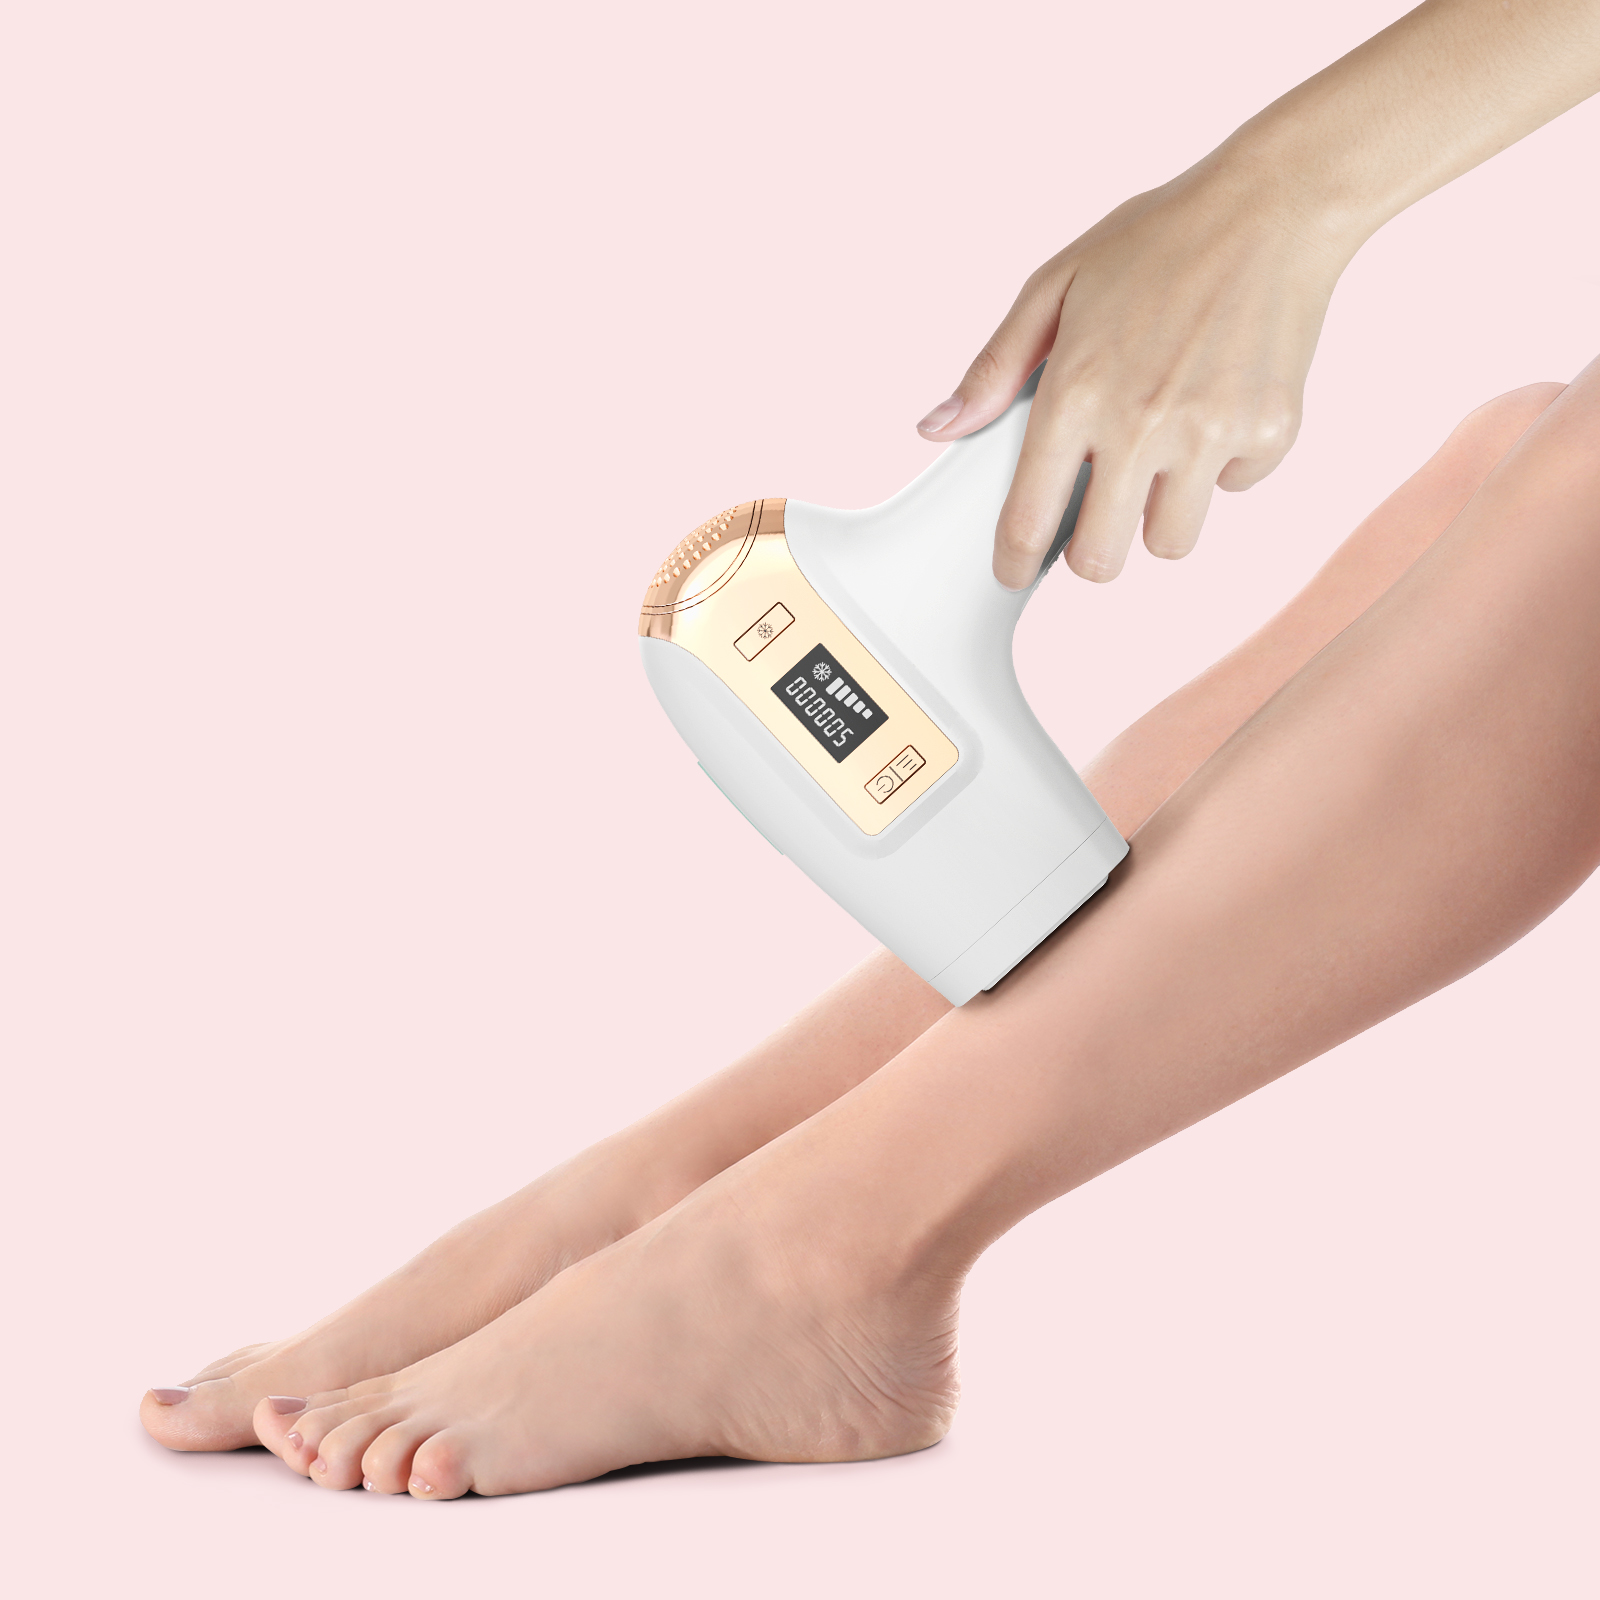 at home permanent hair removal